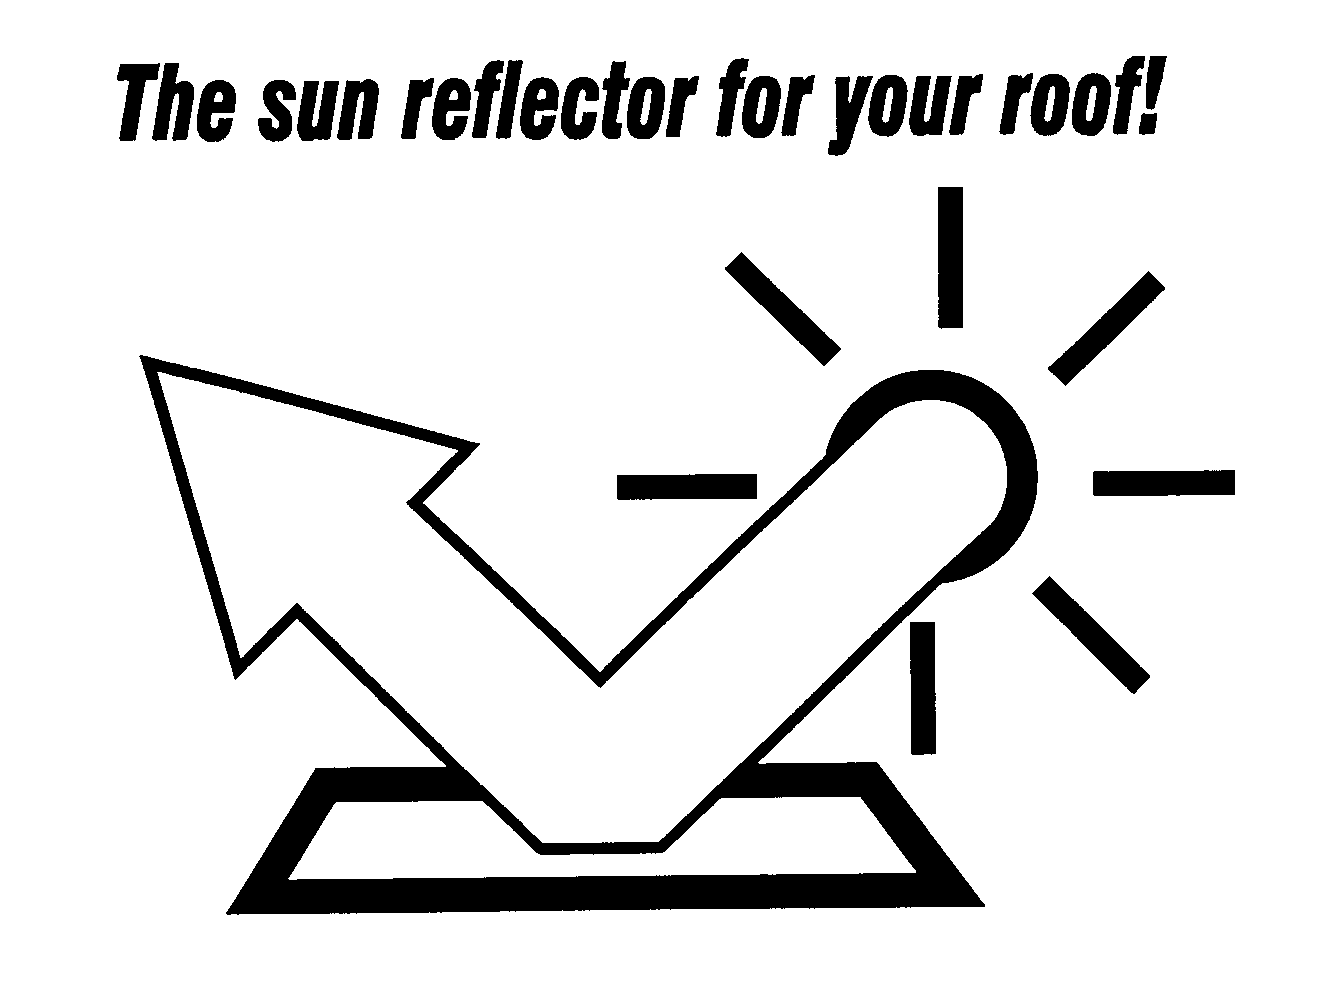  THE SUN REFLECTOR FOR YOUR ROOF!